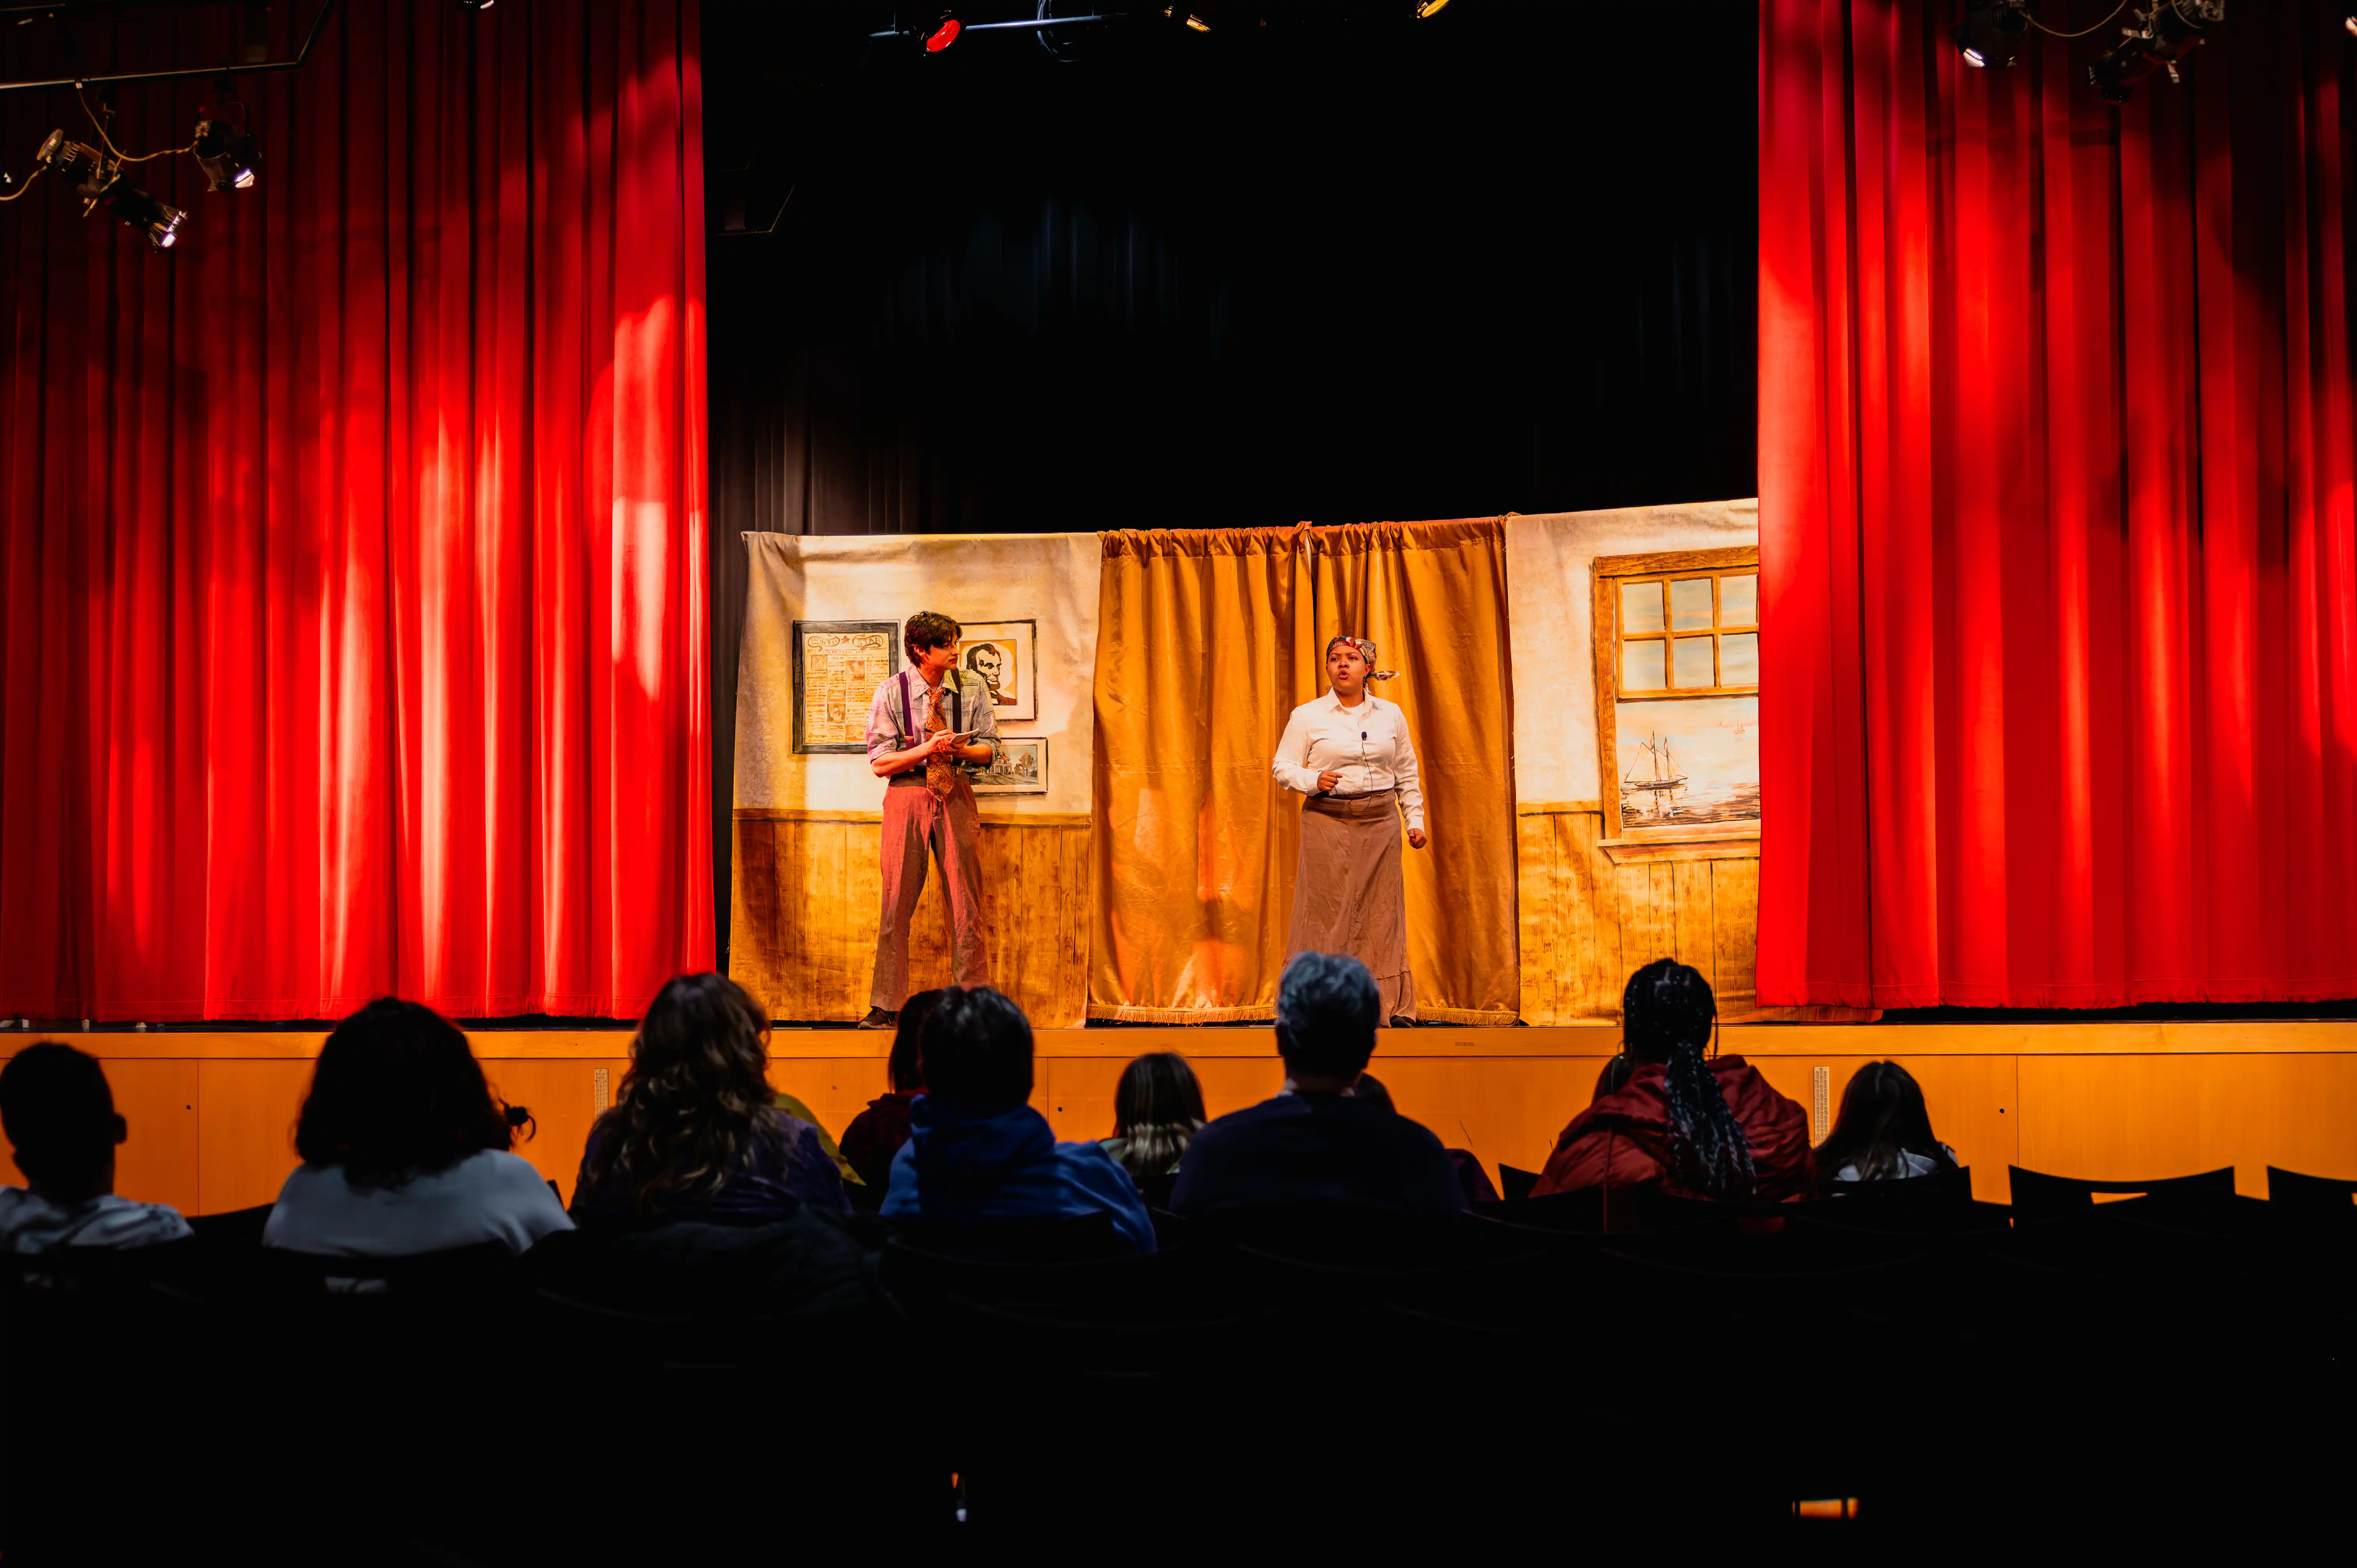 Audience watching two actors performing on a stage with red curtains and a simple set design.